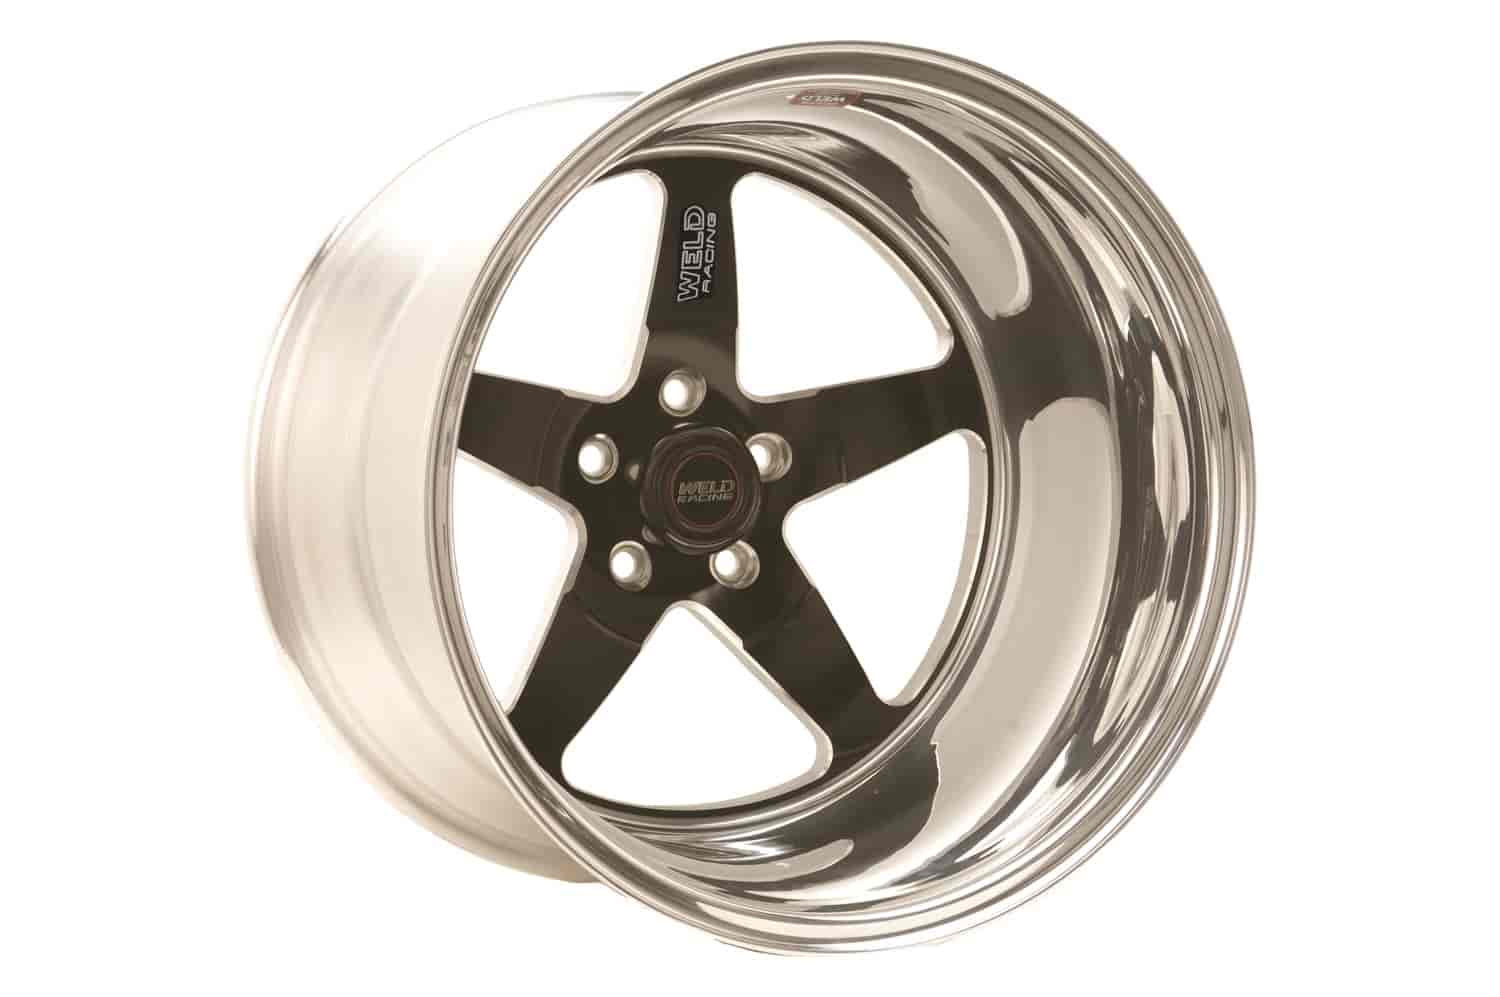 RT-S Series S71 Wheel Size: 15" x 8" Bolt Circle: 5 x 4-3/4" Back Space: 4-1/2"